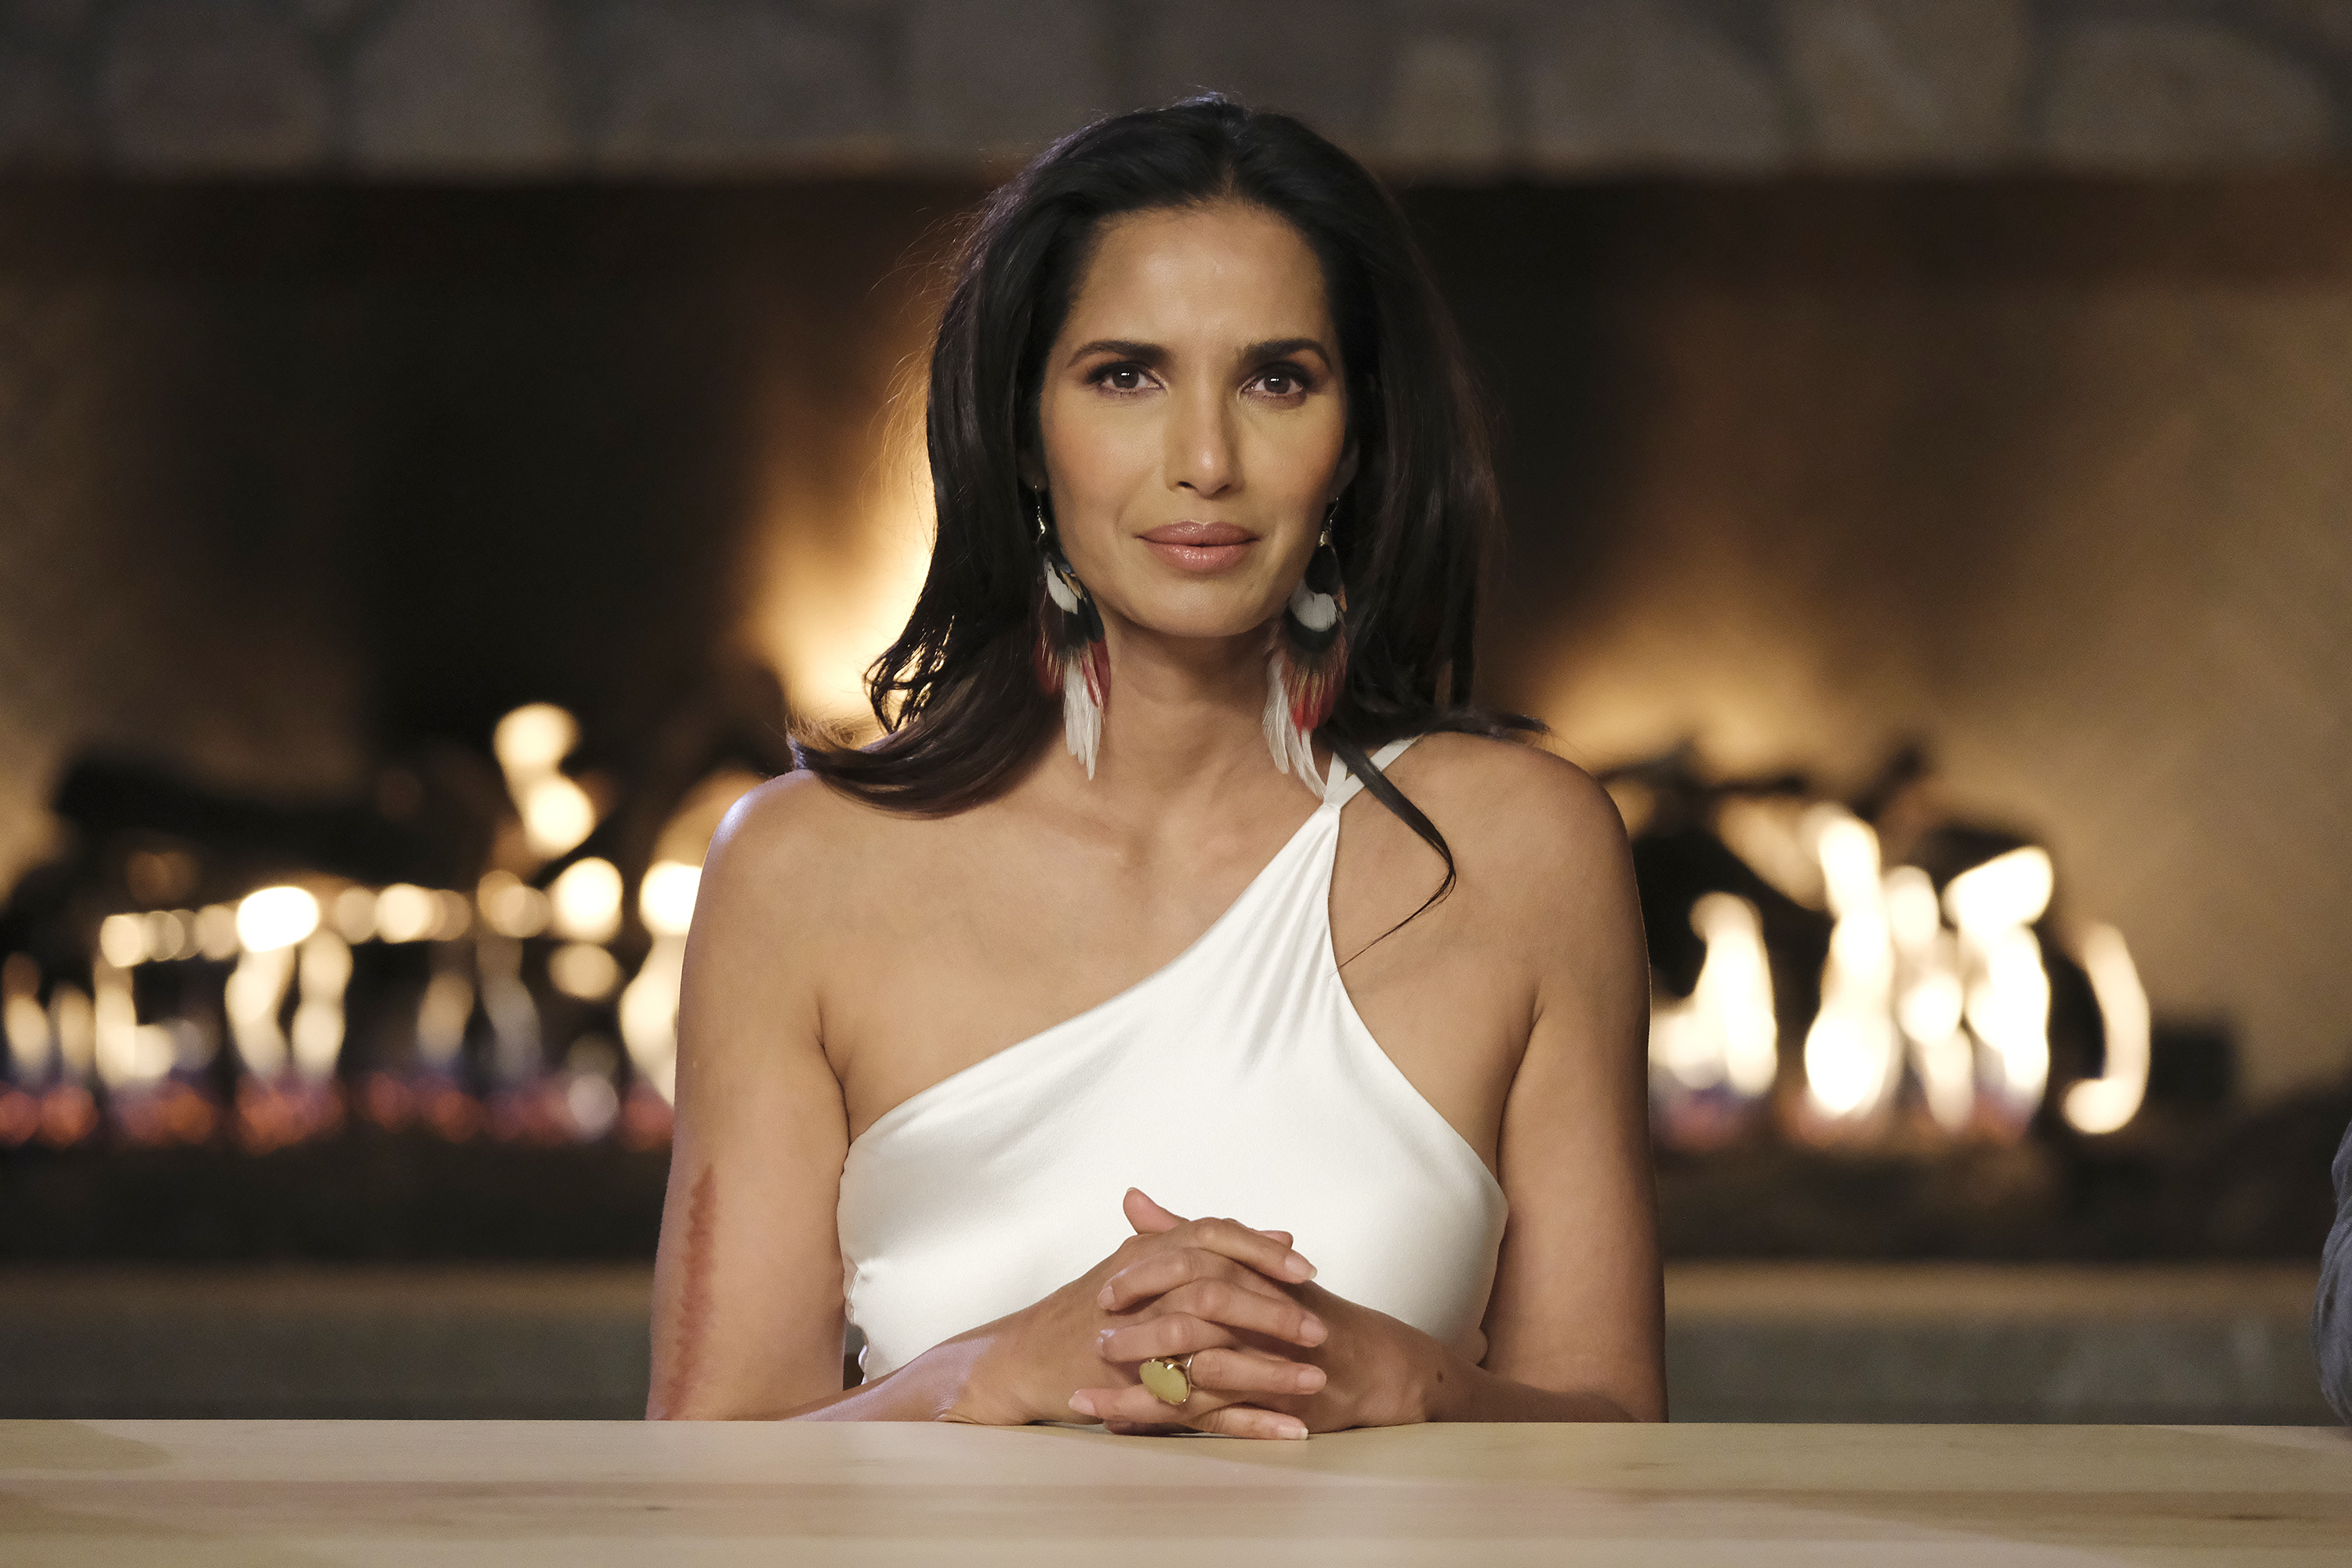 Padma is the former host of Top Chef, and Season 20 was her last season